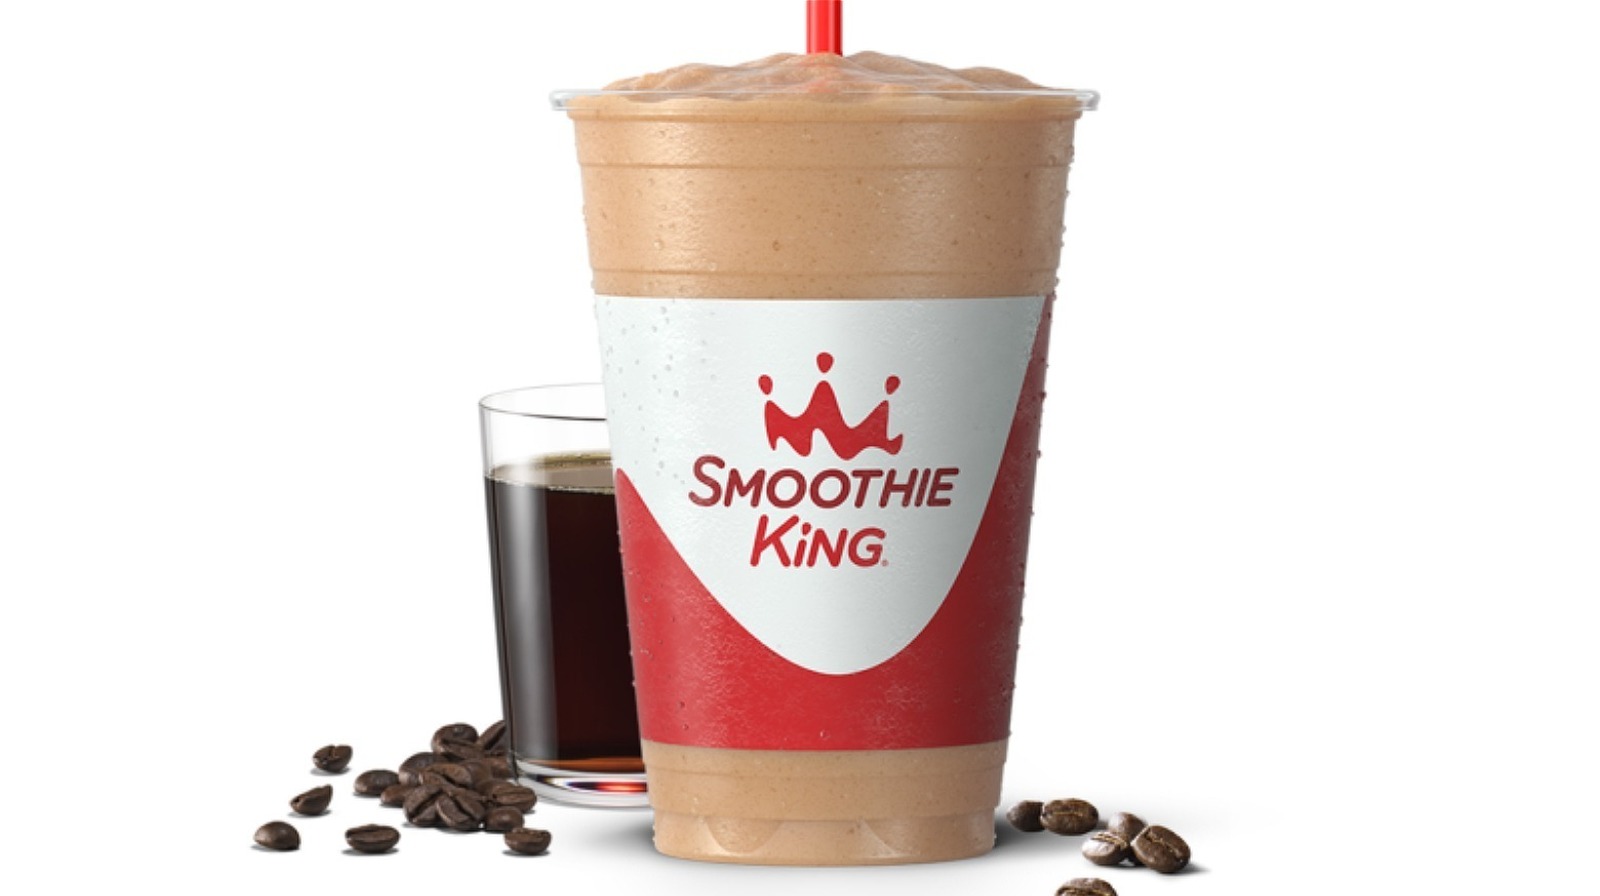 Smoothie King's New Flavor Is Made For Coffee Lovers